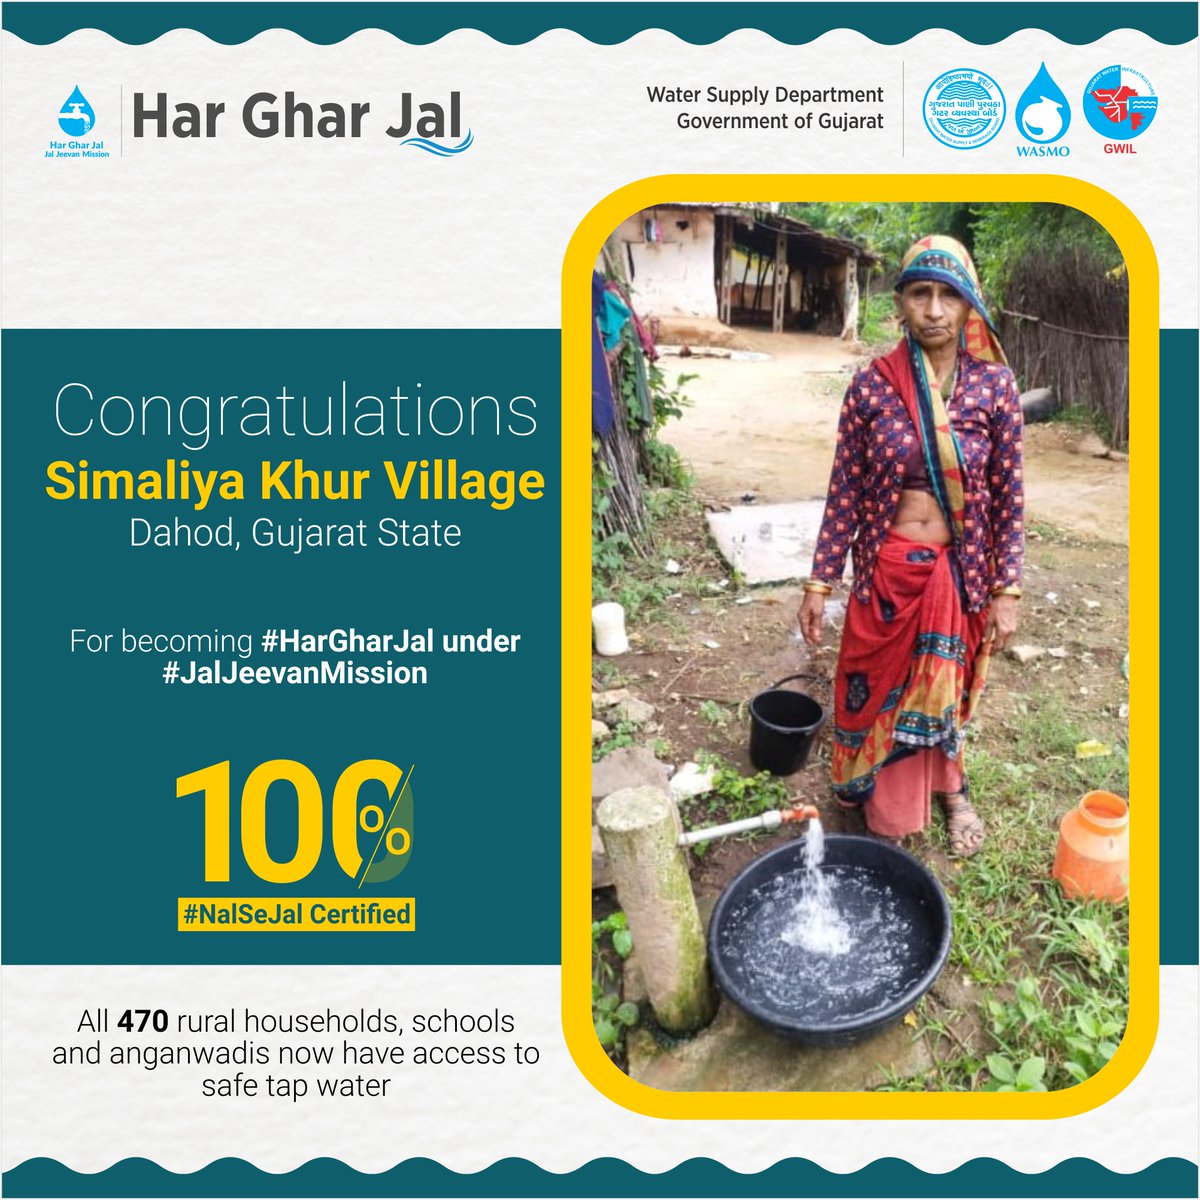 Congratulations to all the people of Simaliya Khur Village of #Dahod, #Gujarat State, for becoming 100% #HarGharNalSeJal certified. All 470 rural households, schools and anganwadis are now getting safe tap water under #JalJeevanMission